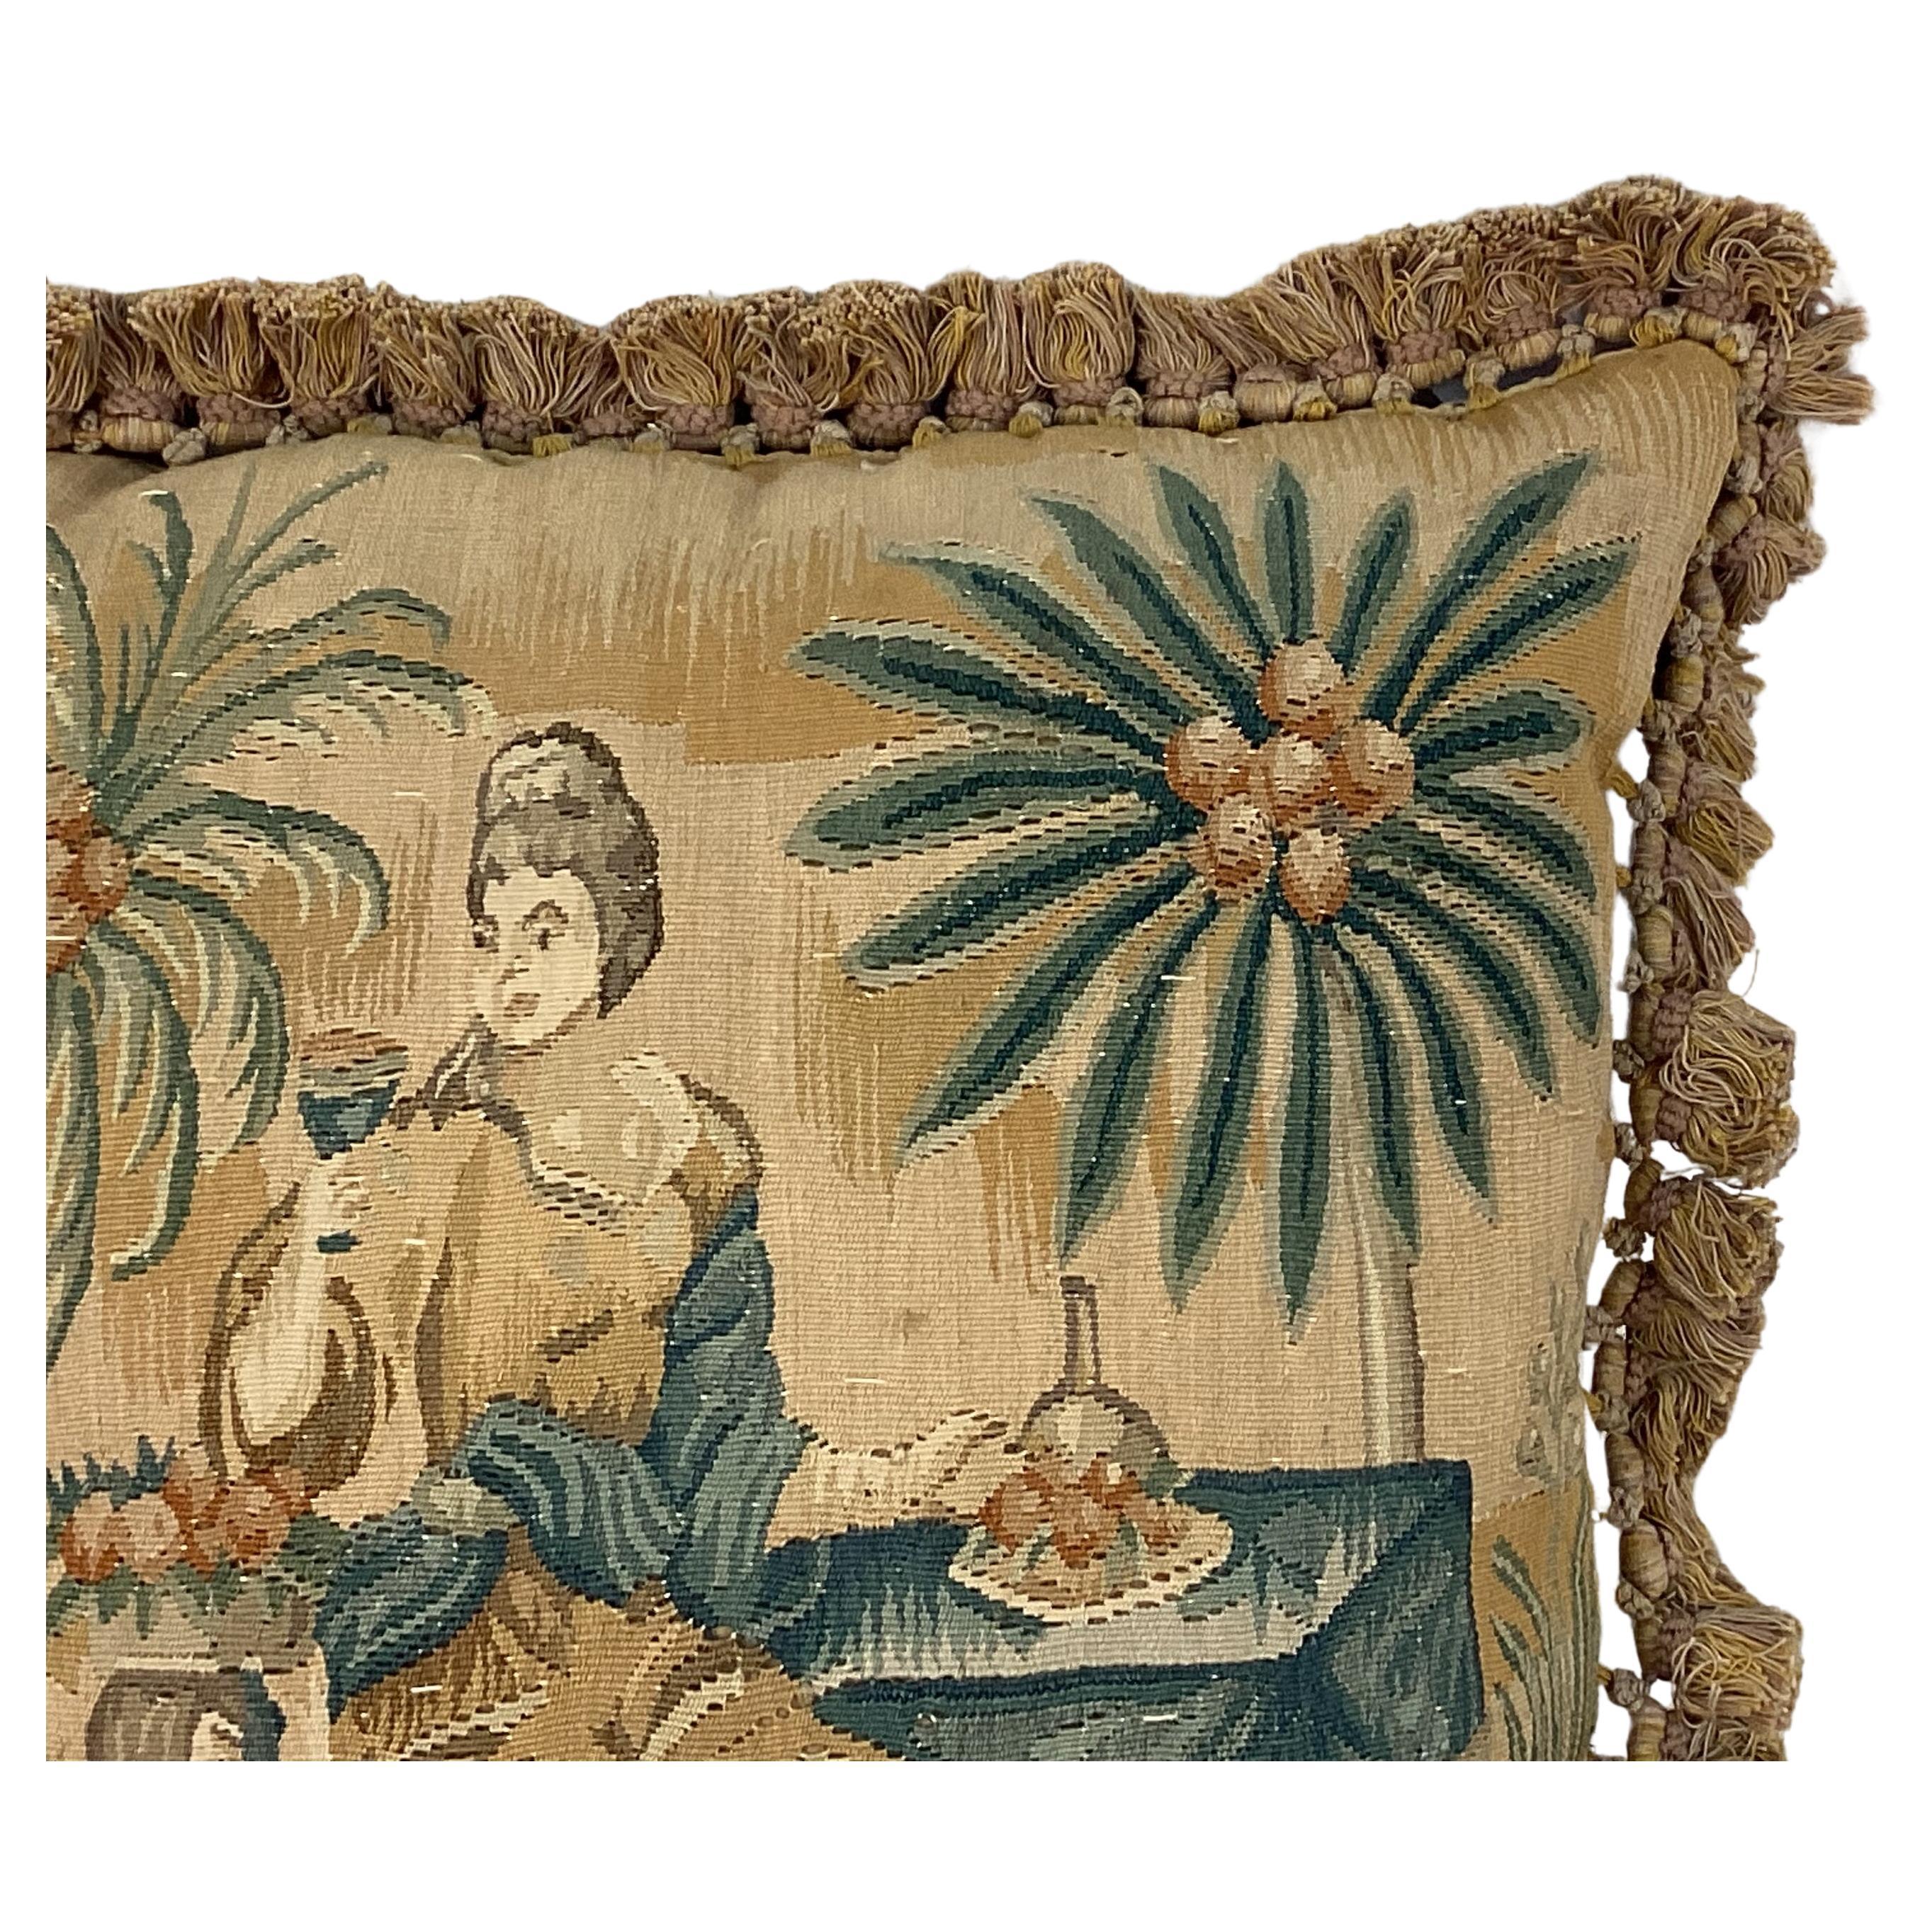 French Provincial 19th Century French Hand-Woven Tapestry Pillow For Sale